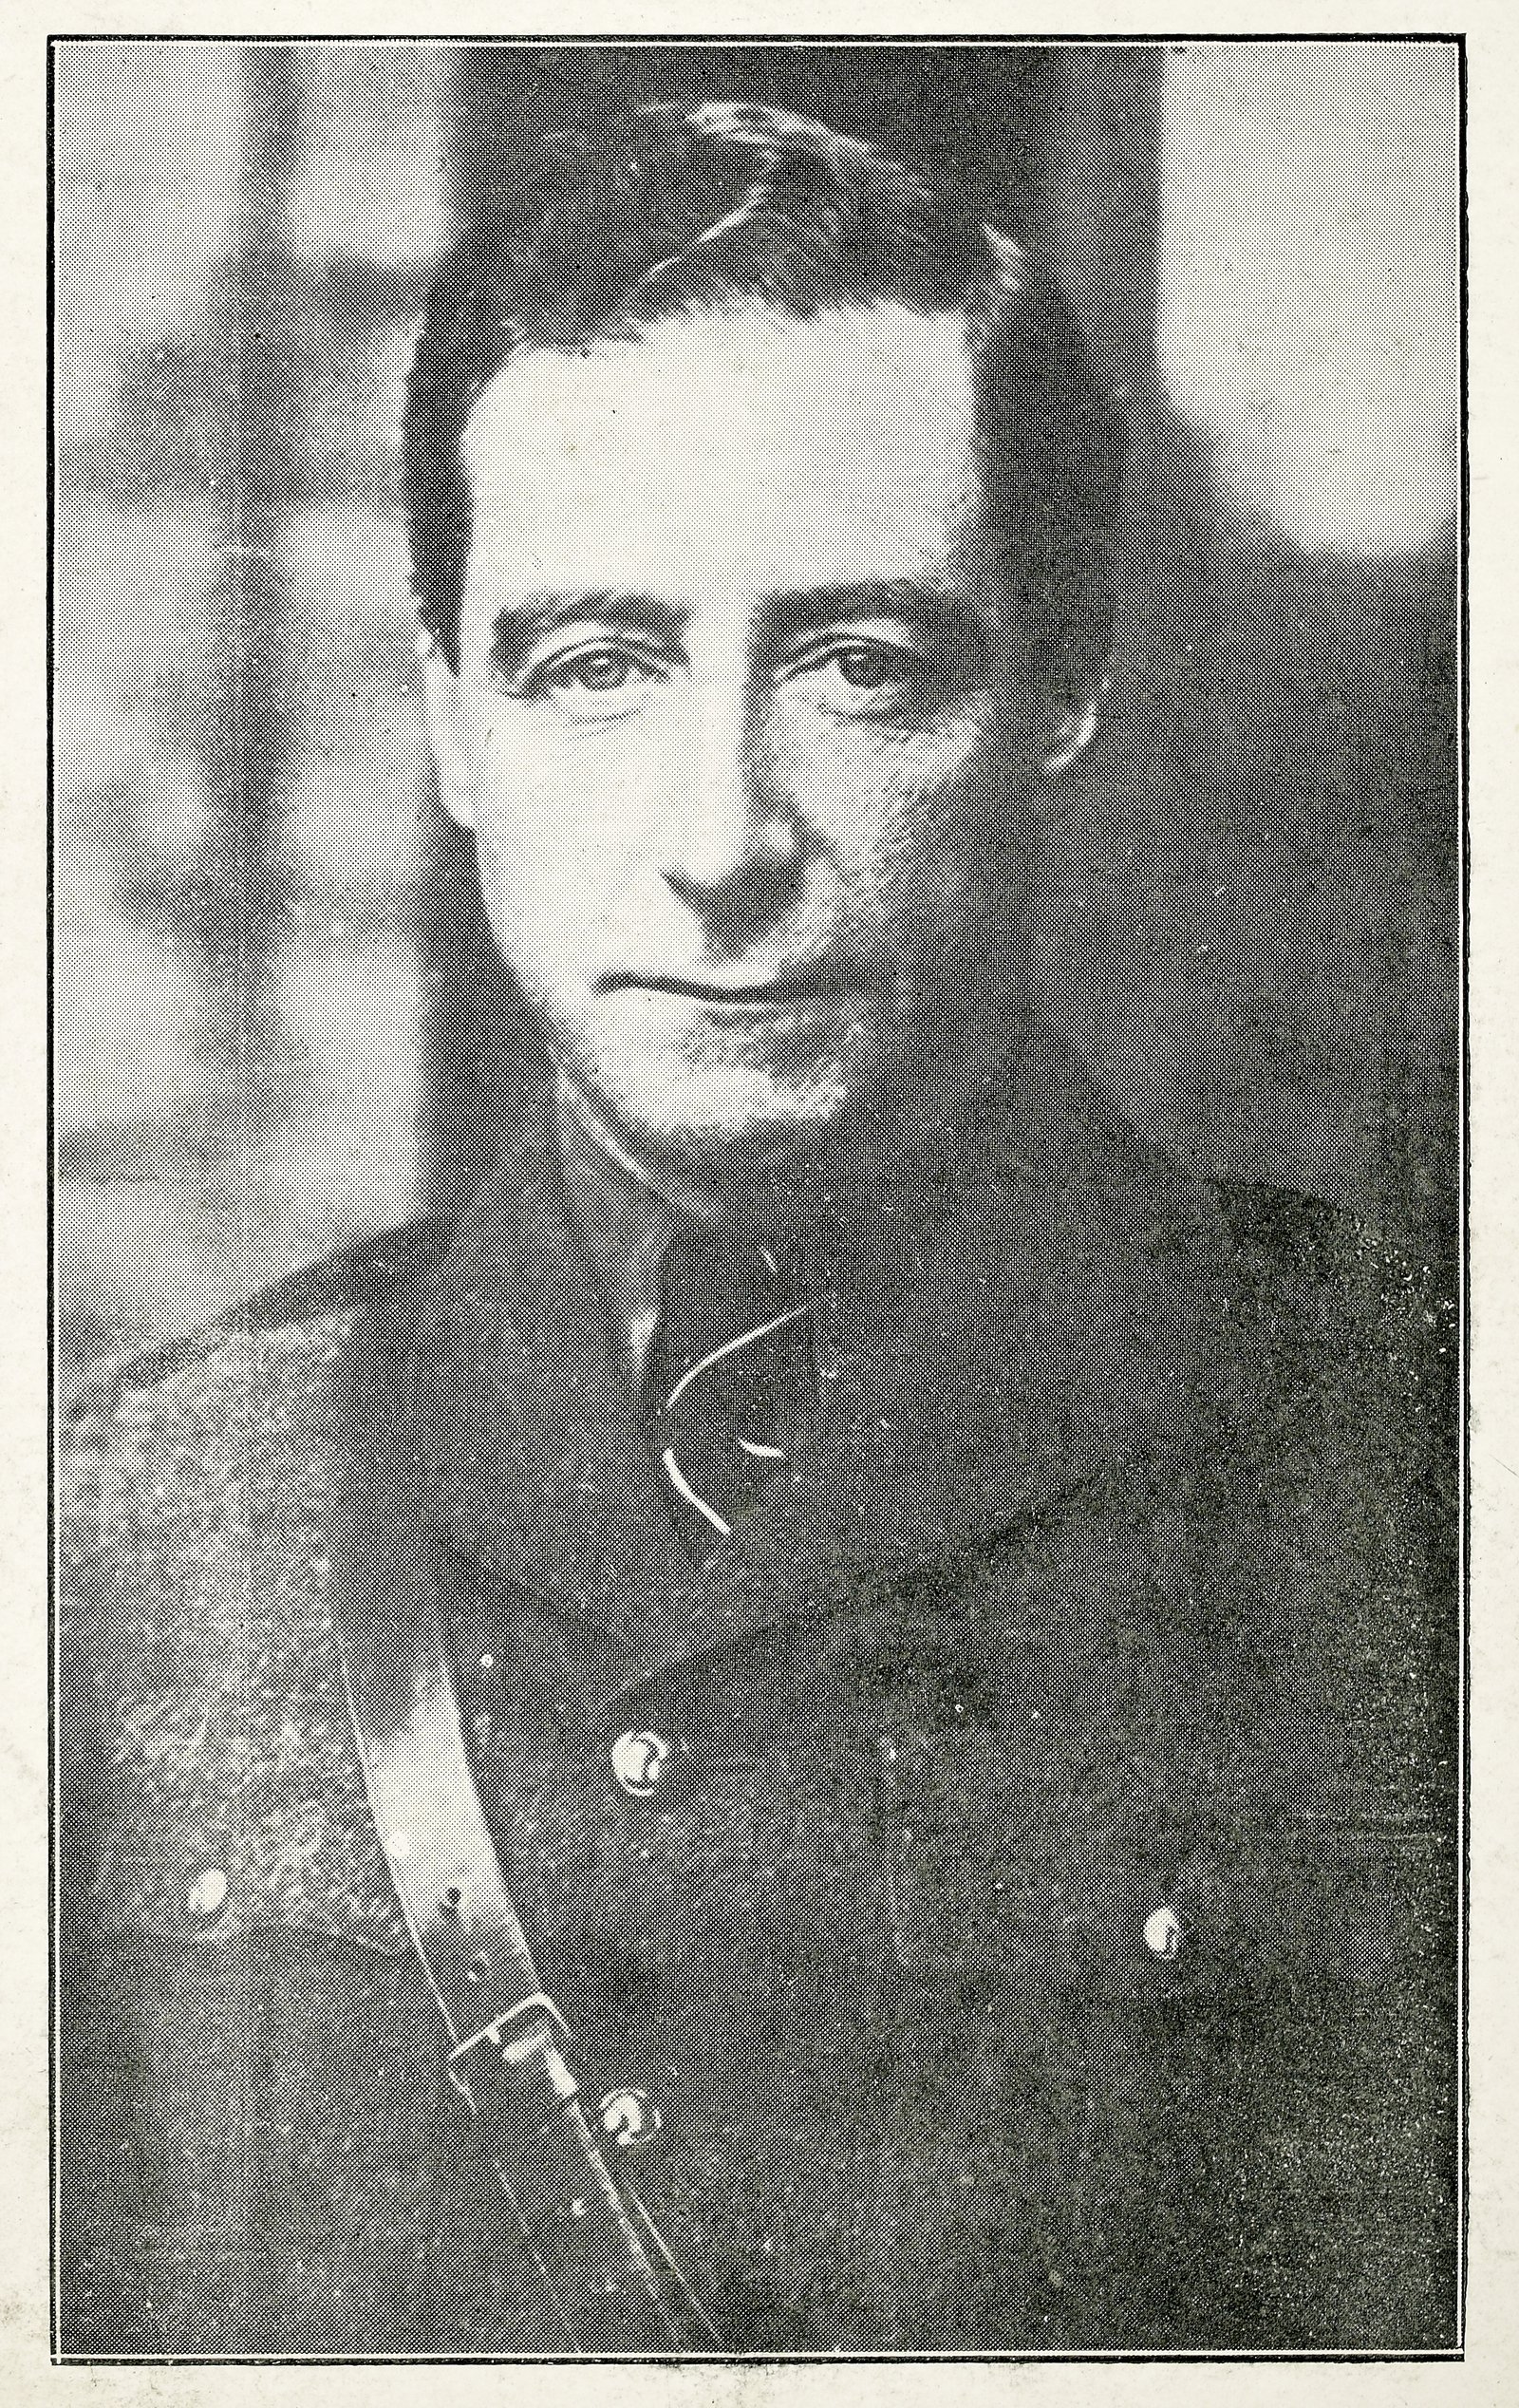 Image - Cathal Brugha (Credit: The National Library)